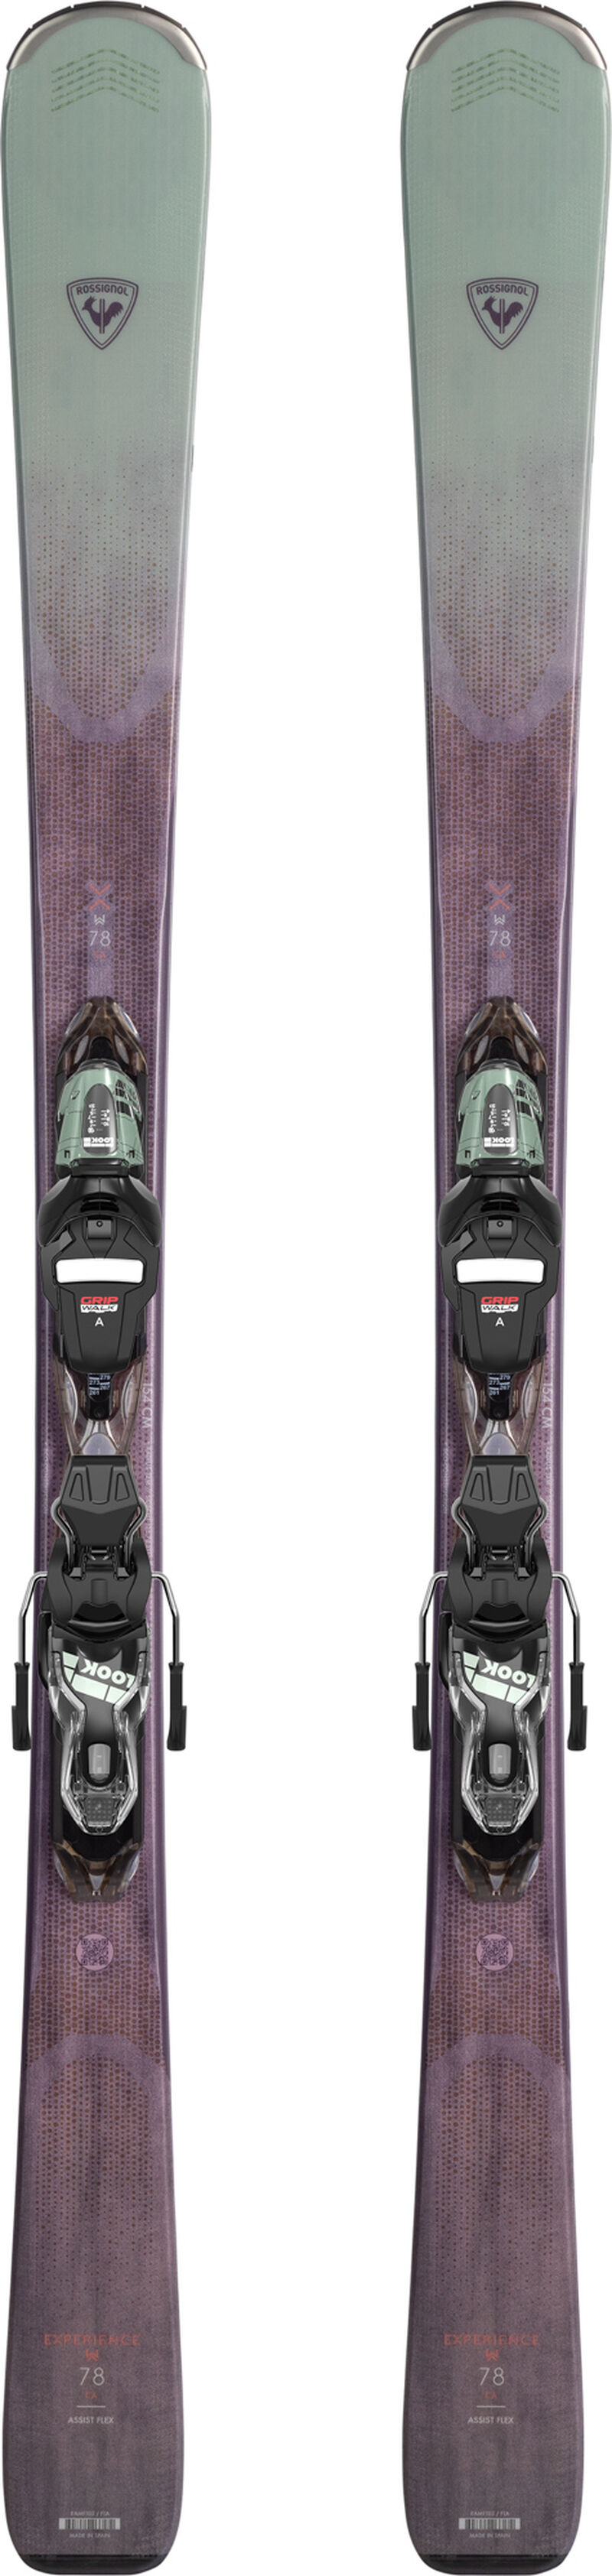 Rossignol EXPERIENCE W 78 CARBON XPRESS 